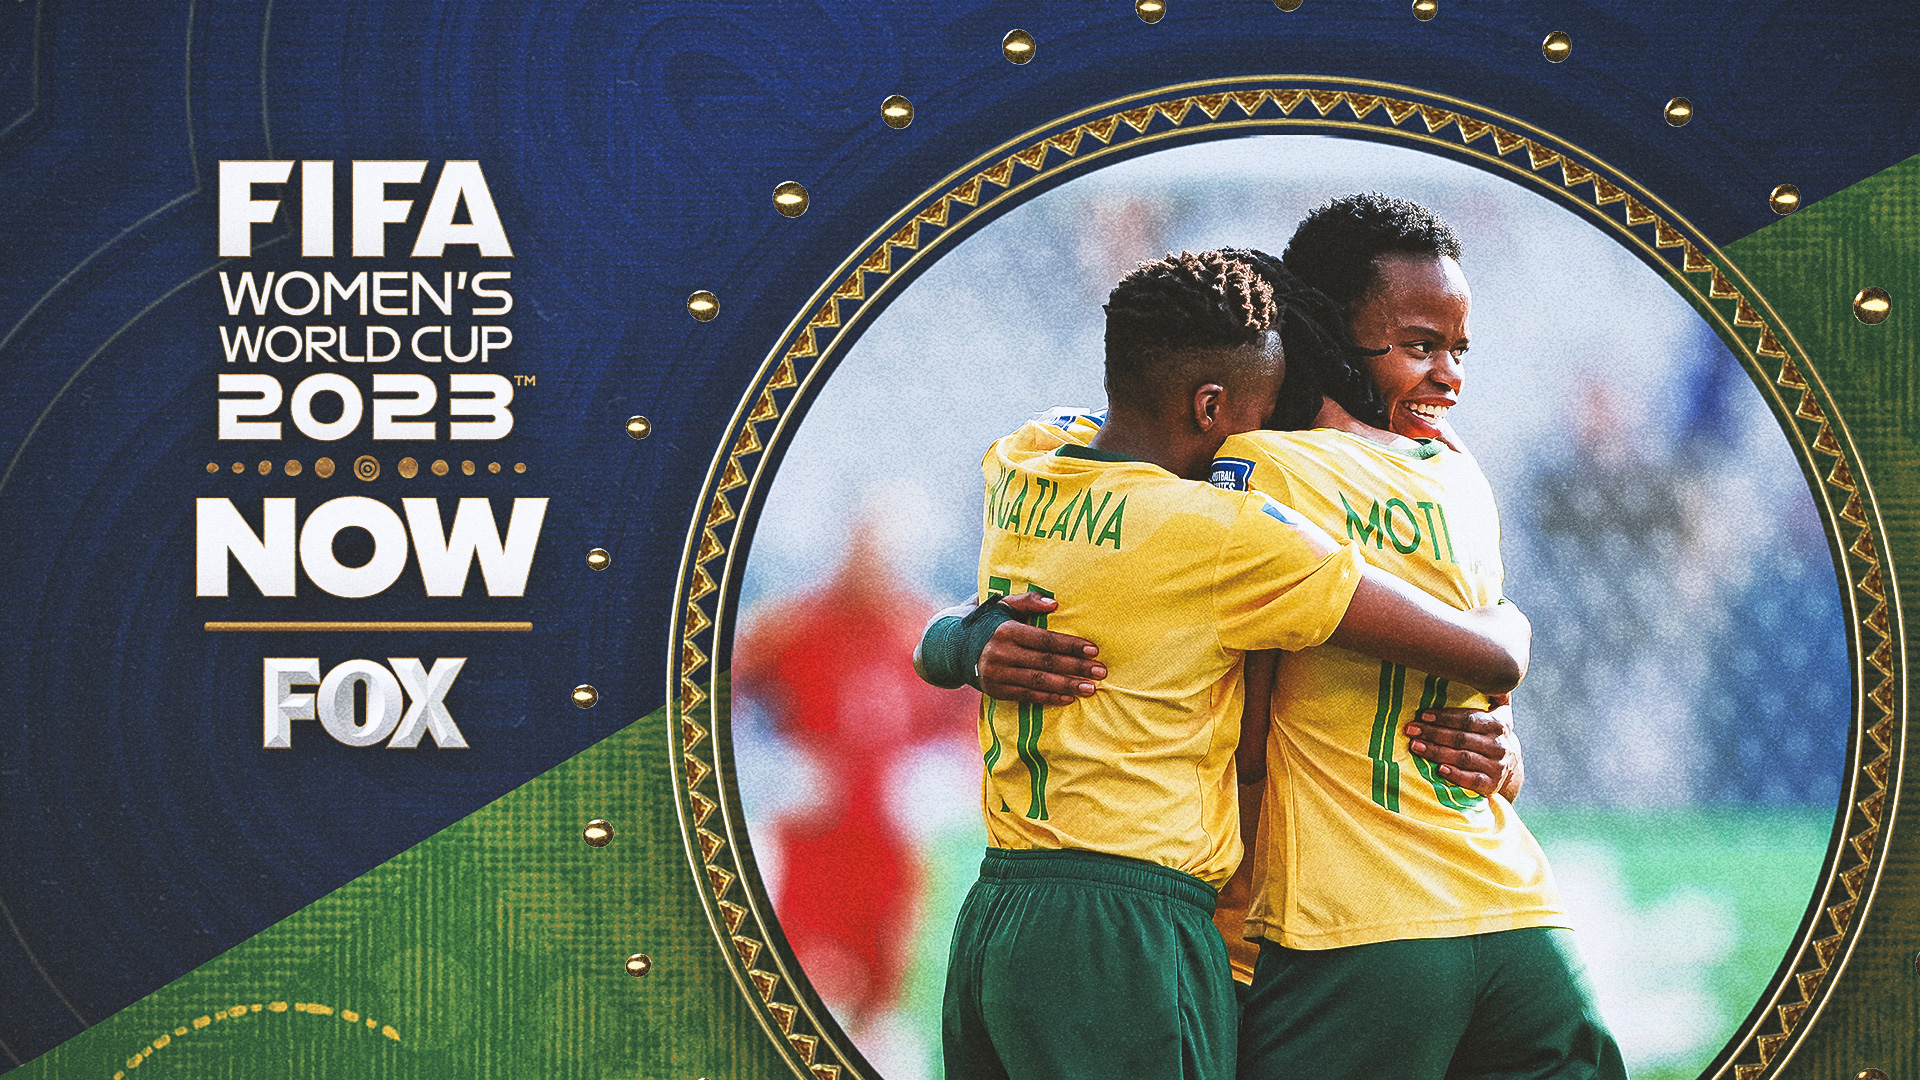 World Cup NOW: Despite draw against Argentina, South Africa is on the rise